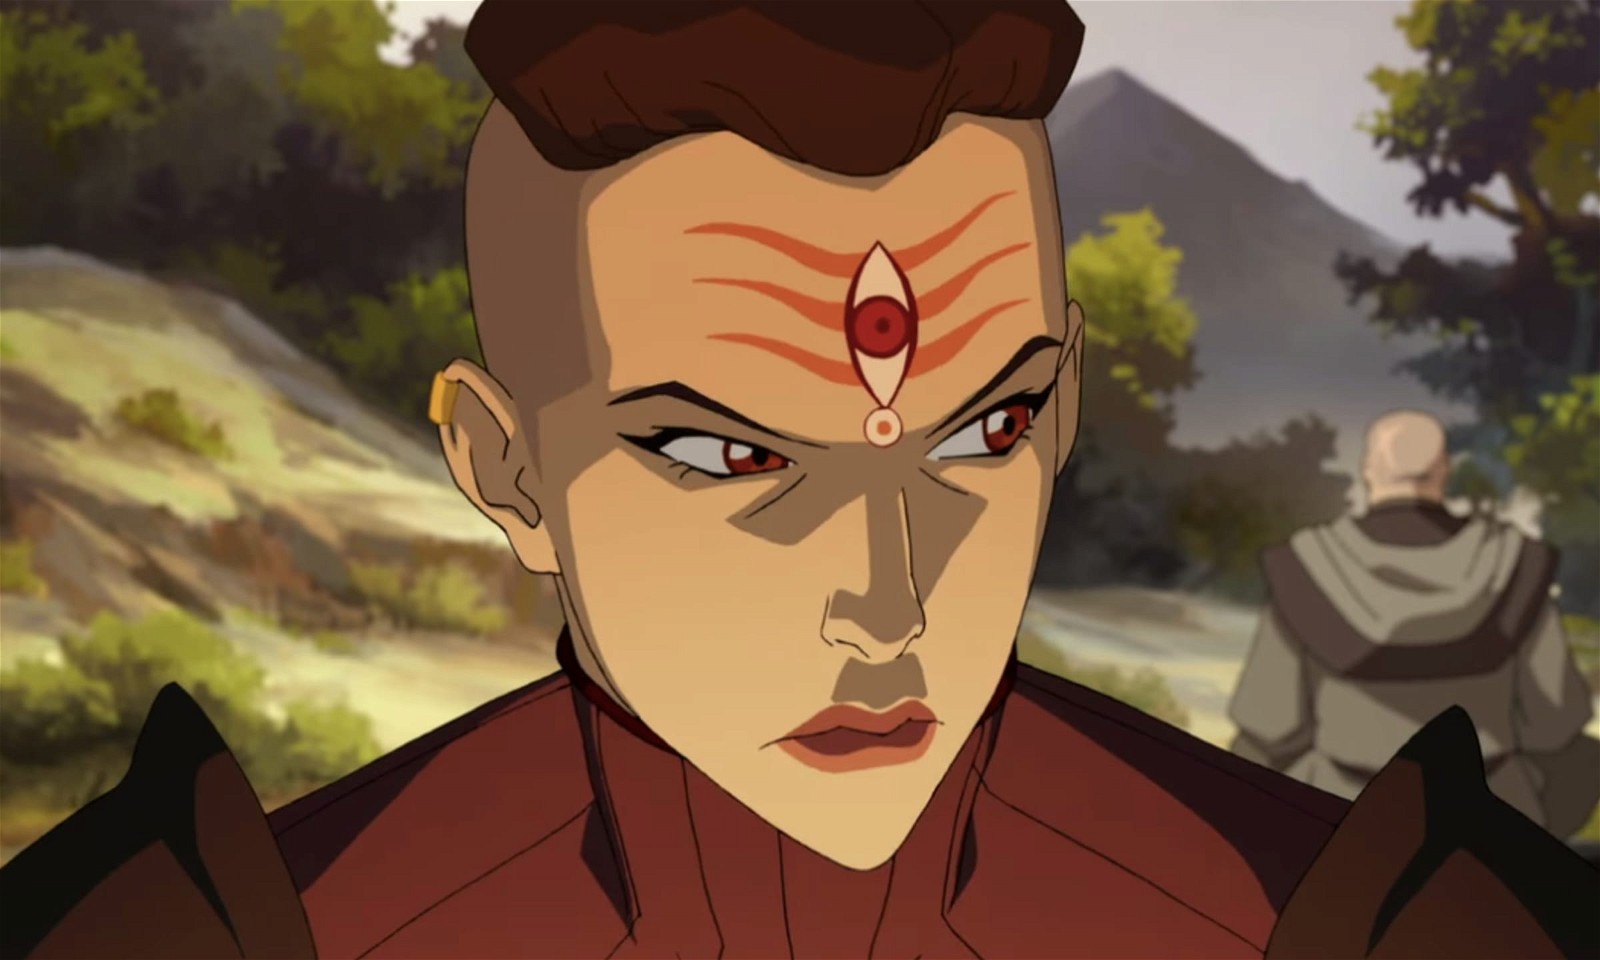 P'Li, another Combustion Bender from Avatar: The Legend of Korra